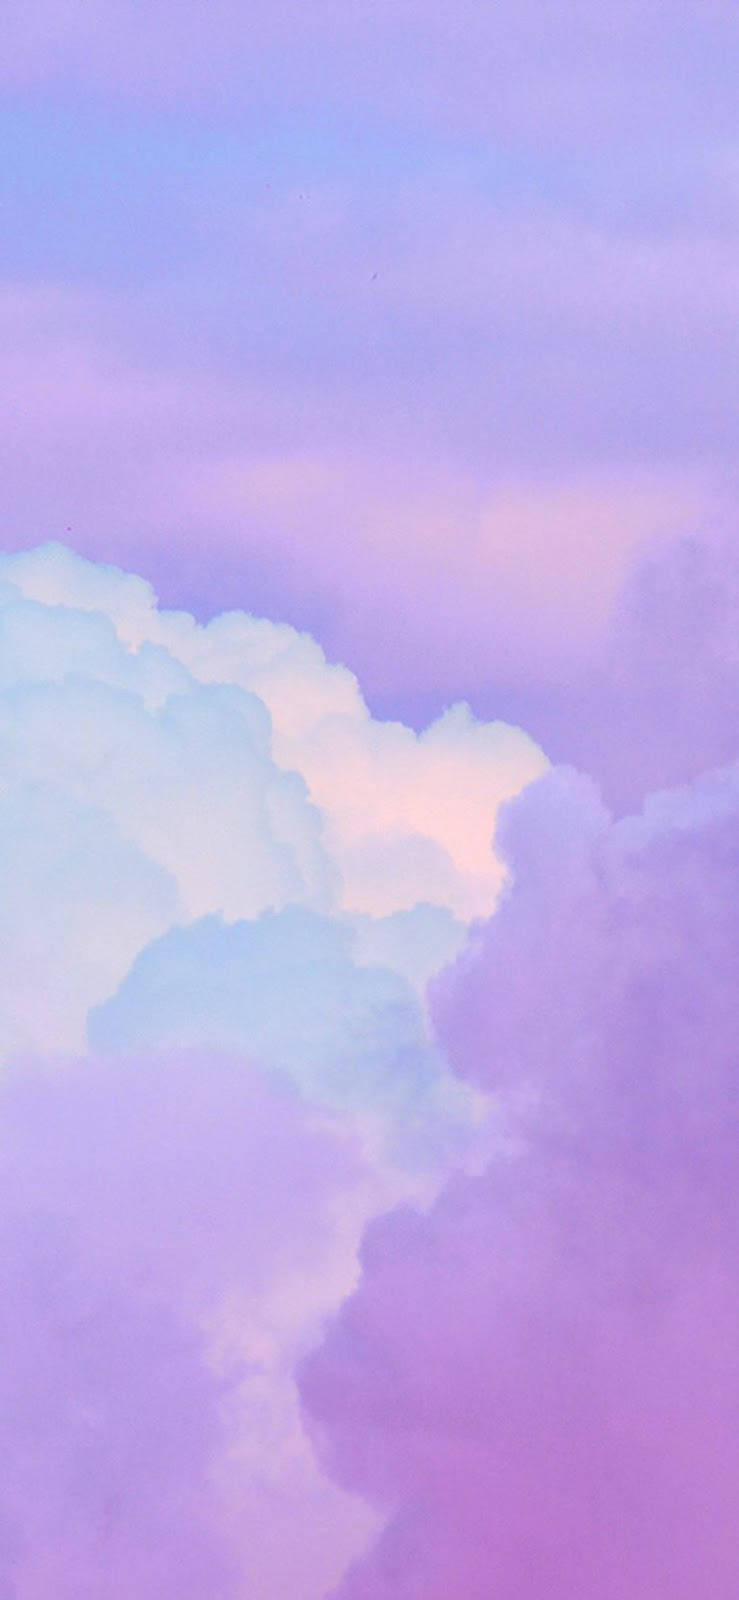 Aesthetic Purple Sky For IPhone Wallpaper